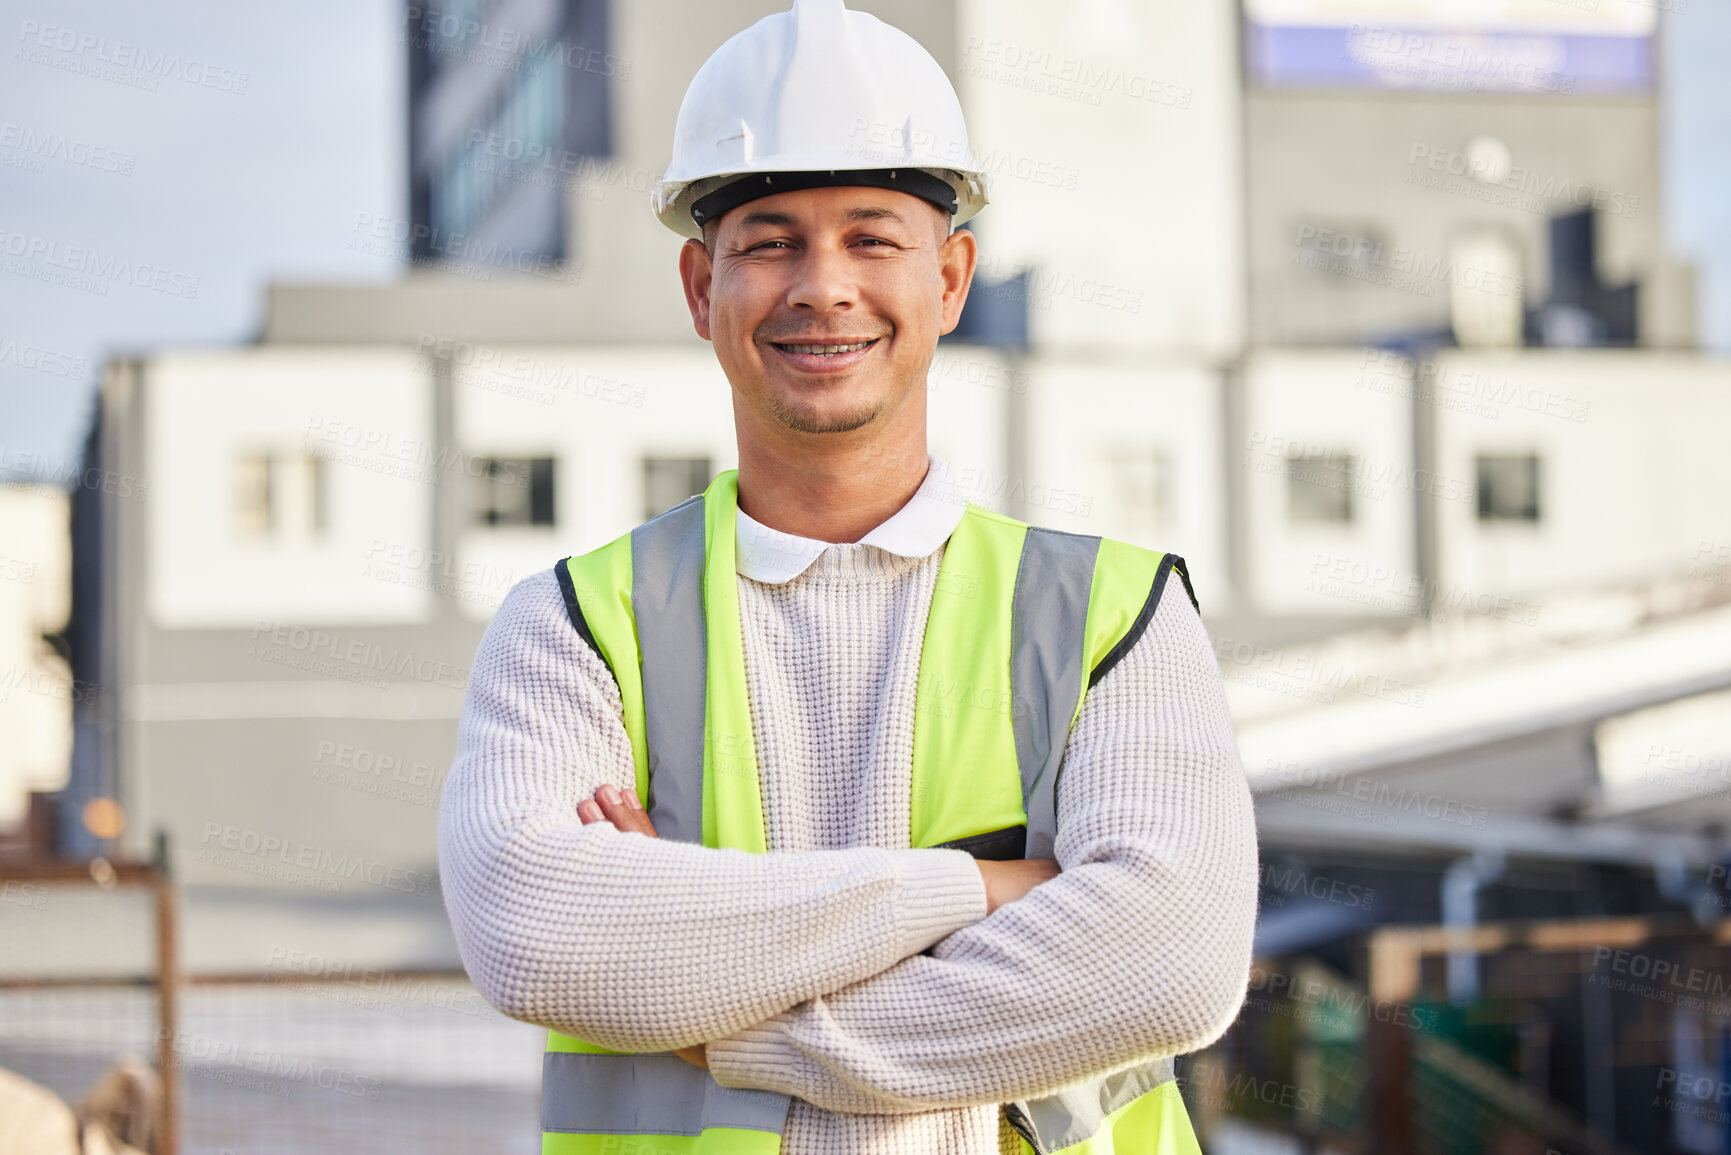 Buy stock photo Architect man, outdoor portrait and arms crossed with leadership, smile and vision for property development. Architecture industry expert, engineer and focus for happiness, buildings and career goals